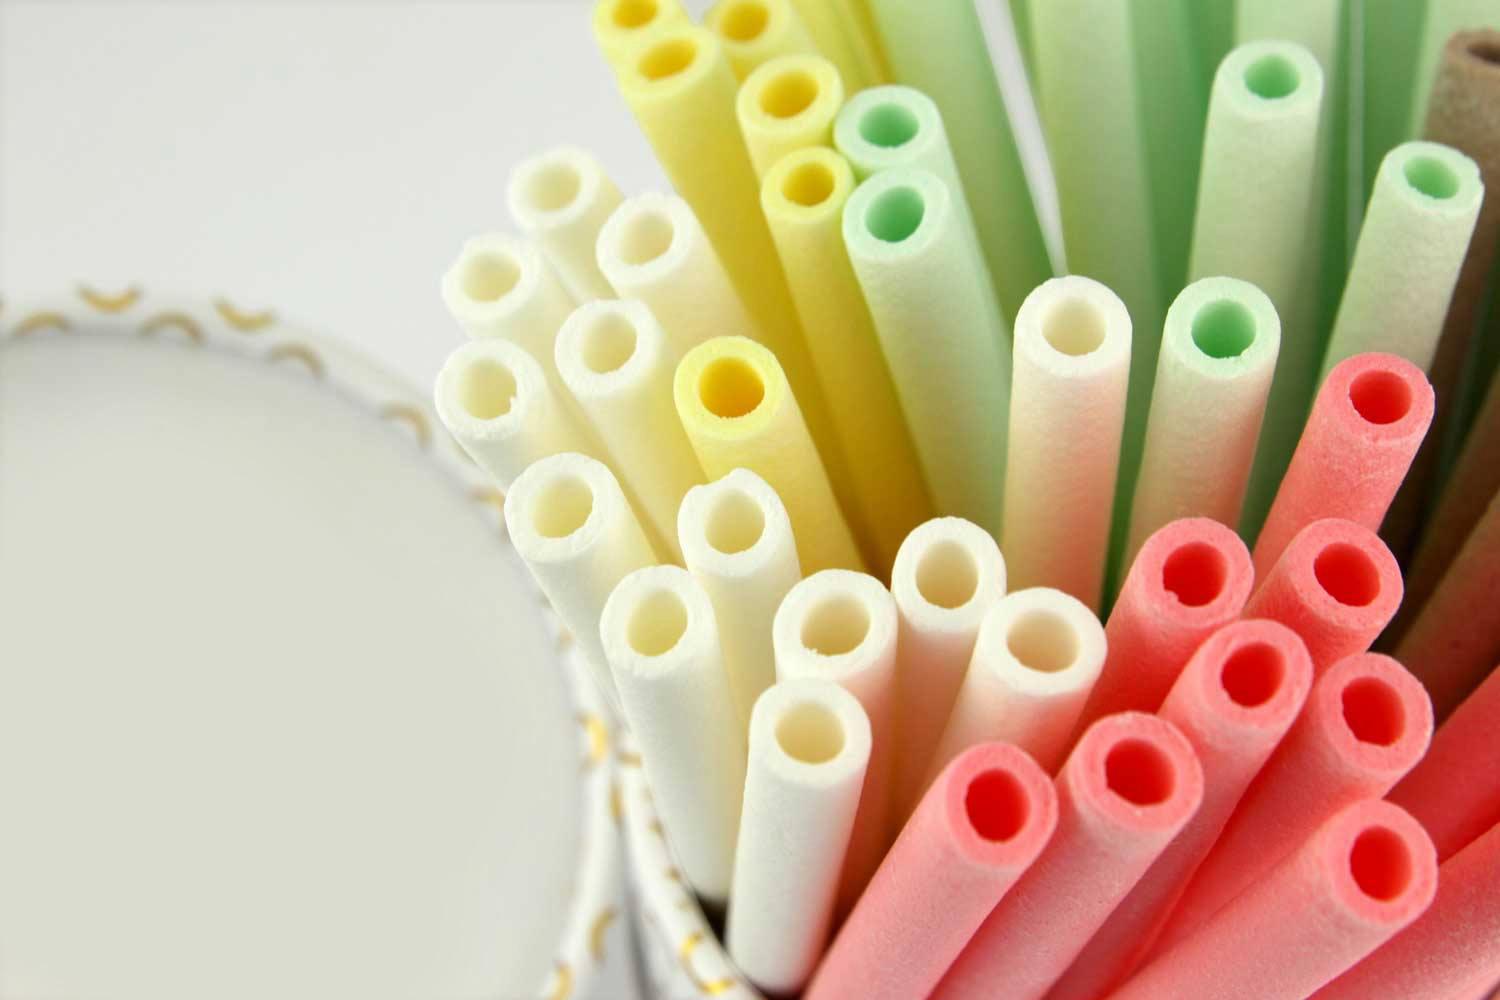 Eat zus straw can 95 Things